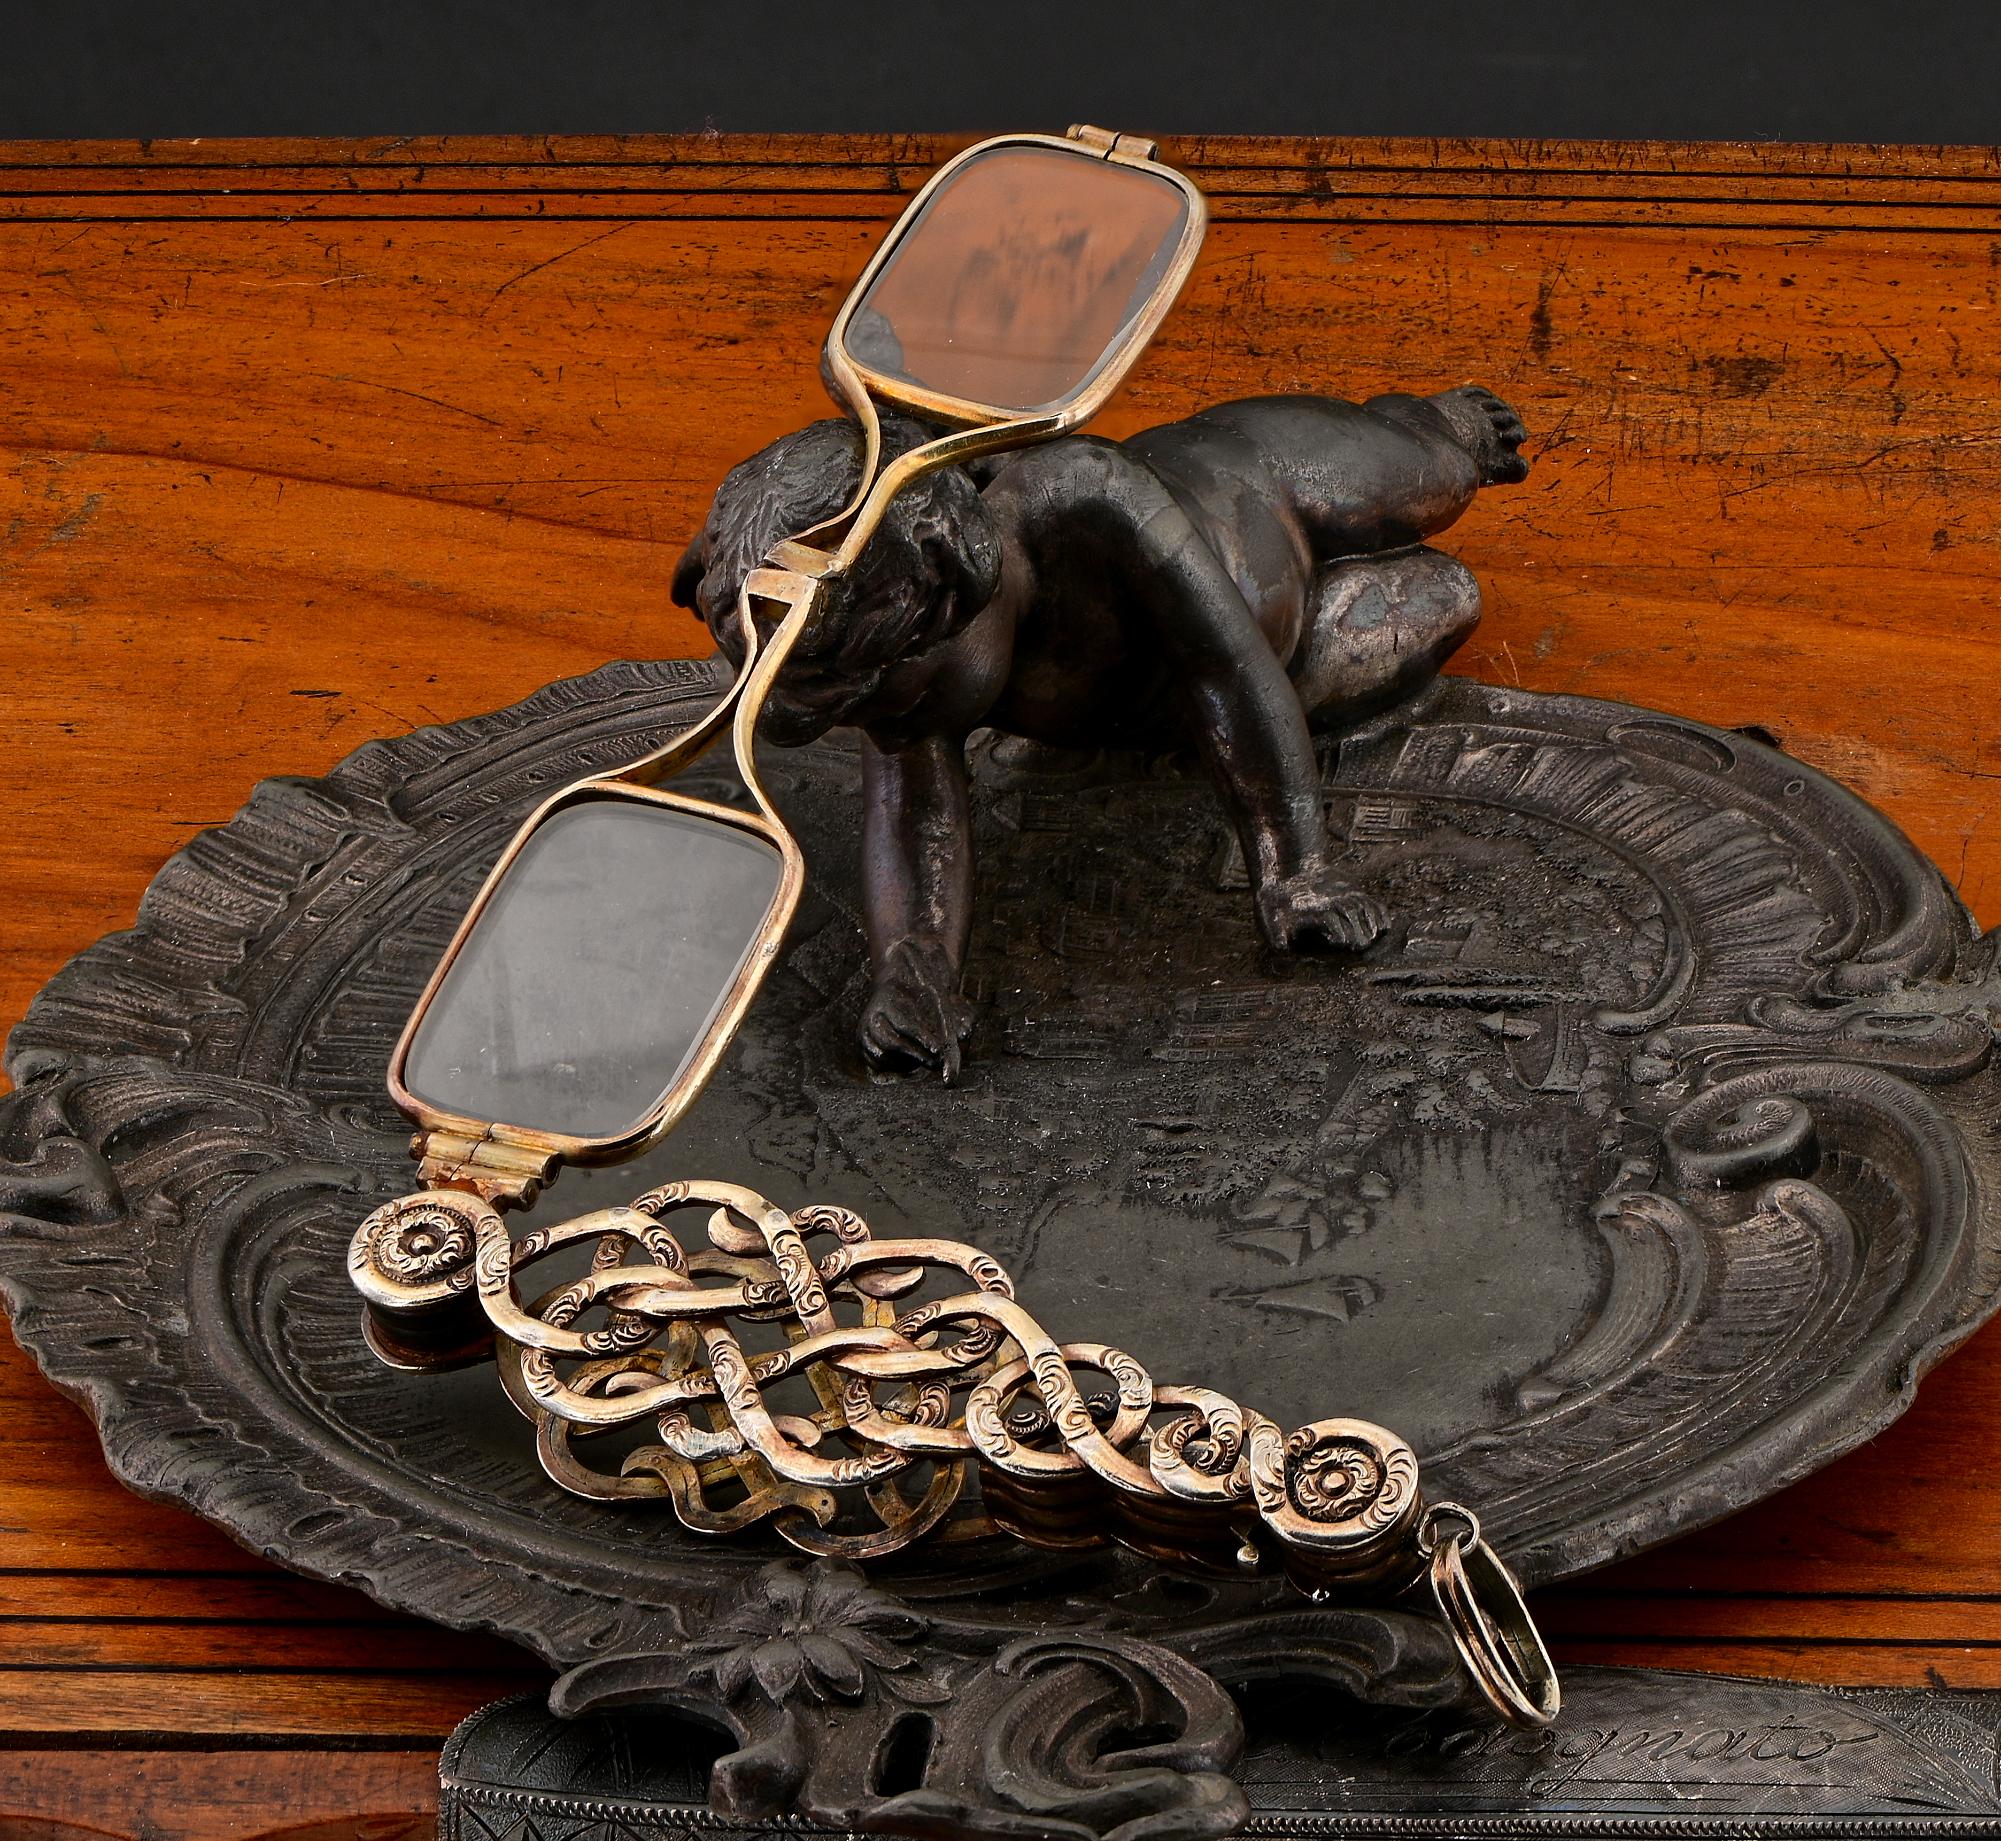 Rare Find
This incredible Victorian period antique lorgnette pendant is amazingly crafted, 1890 ca.
Solid 14 KT gold tested in all parts, hallmarks present on several places with eagle heads on the eye glasses, Possibly French origin
the gold